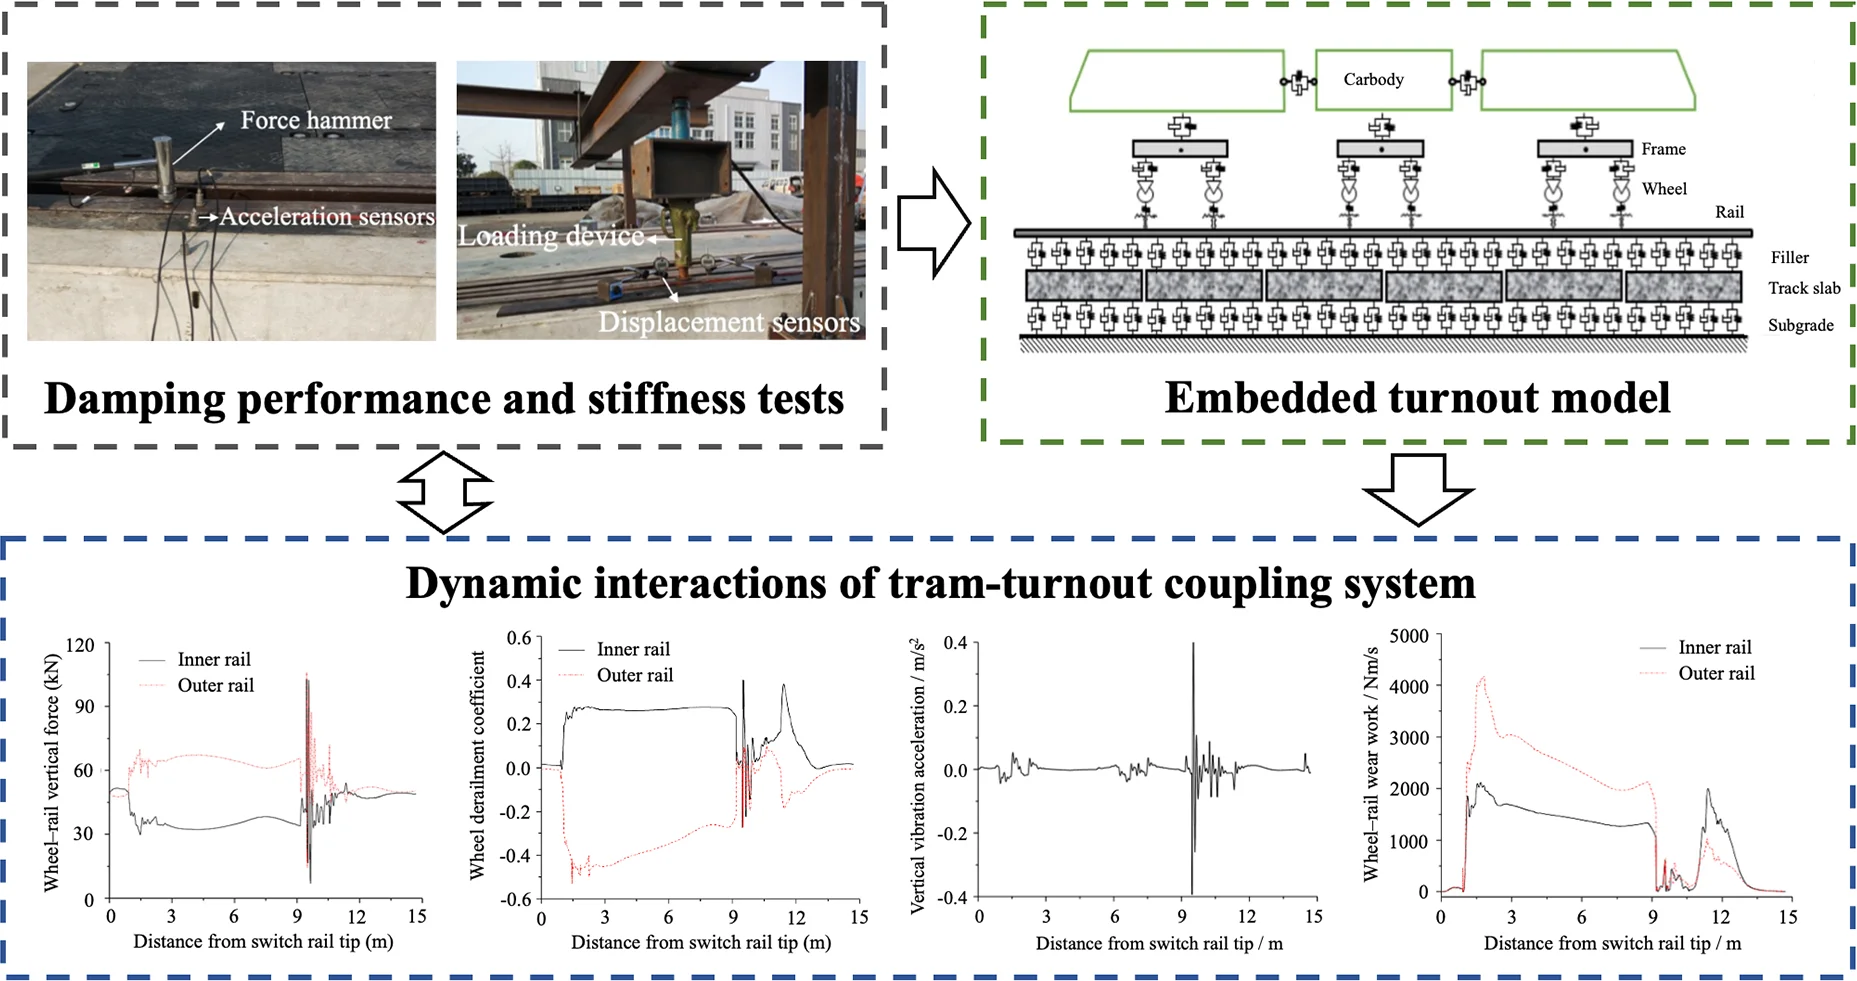 Dynamic interactions of tram-turnout coupling system in embedded turnout area